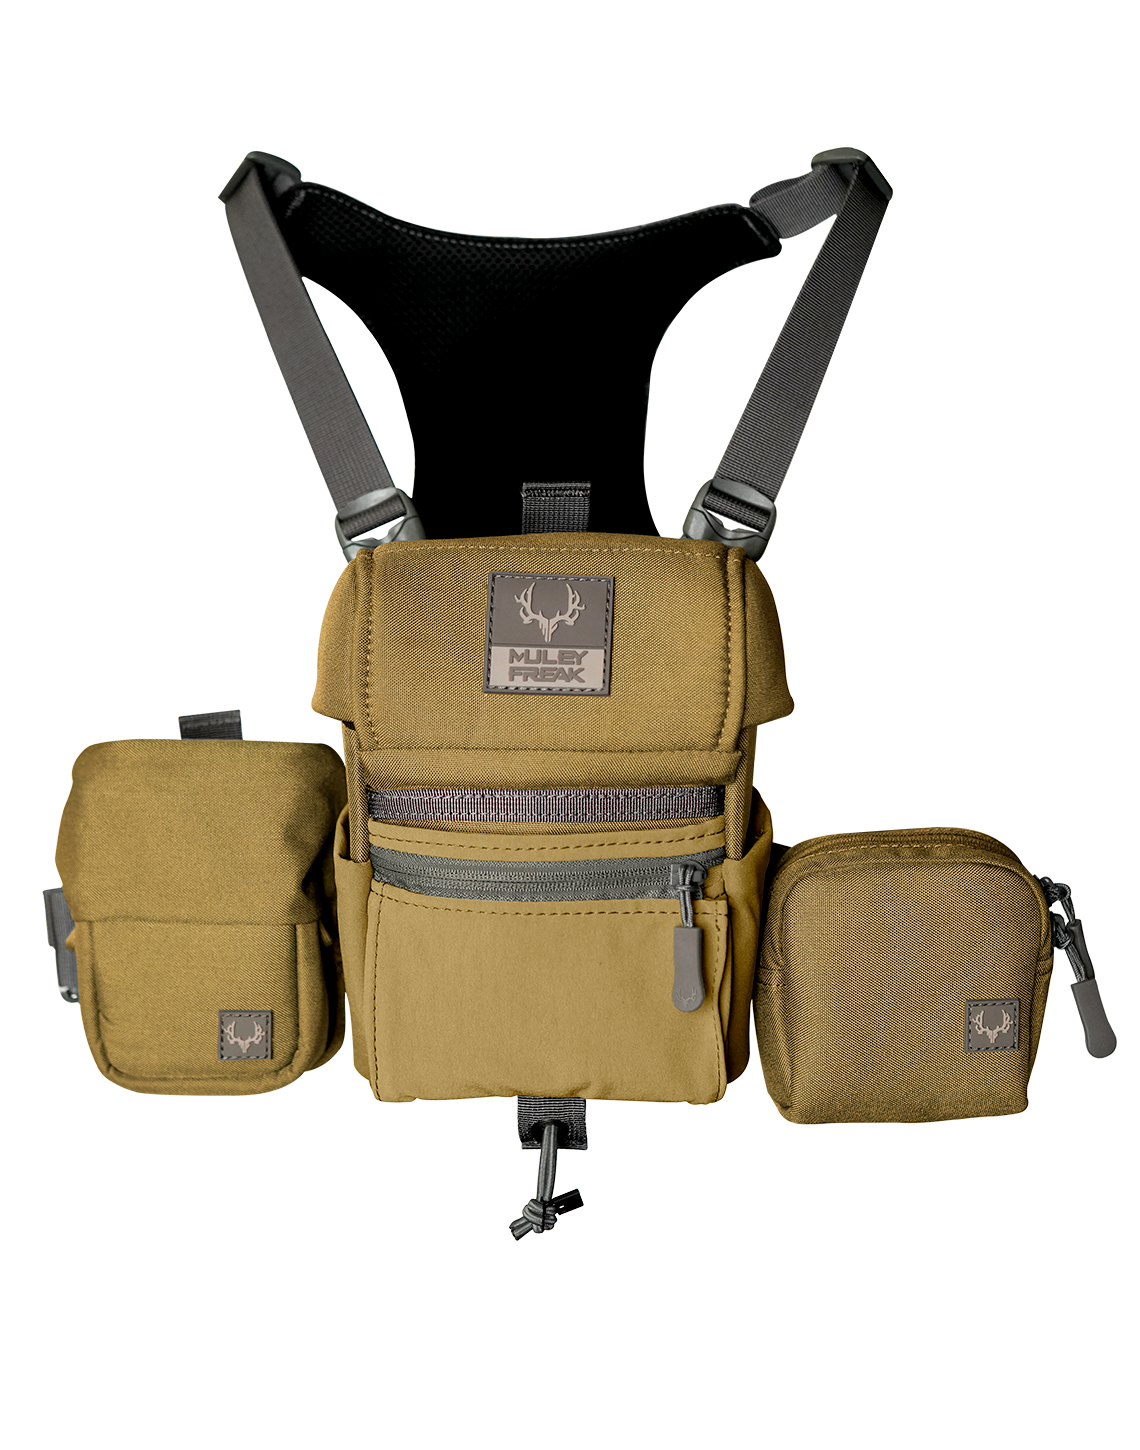 Game Changer Bino Harness in coyote brown showcasing rugged outdoor adaptability.